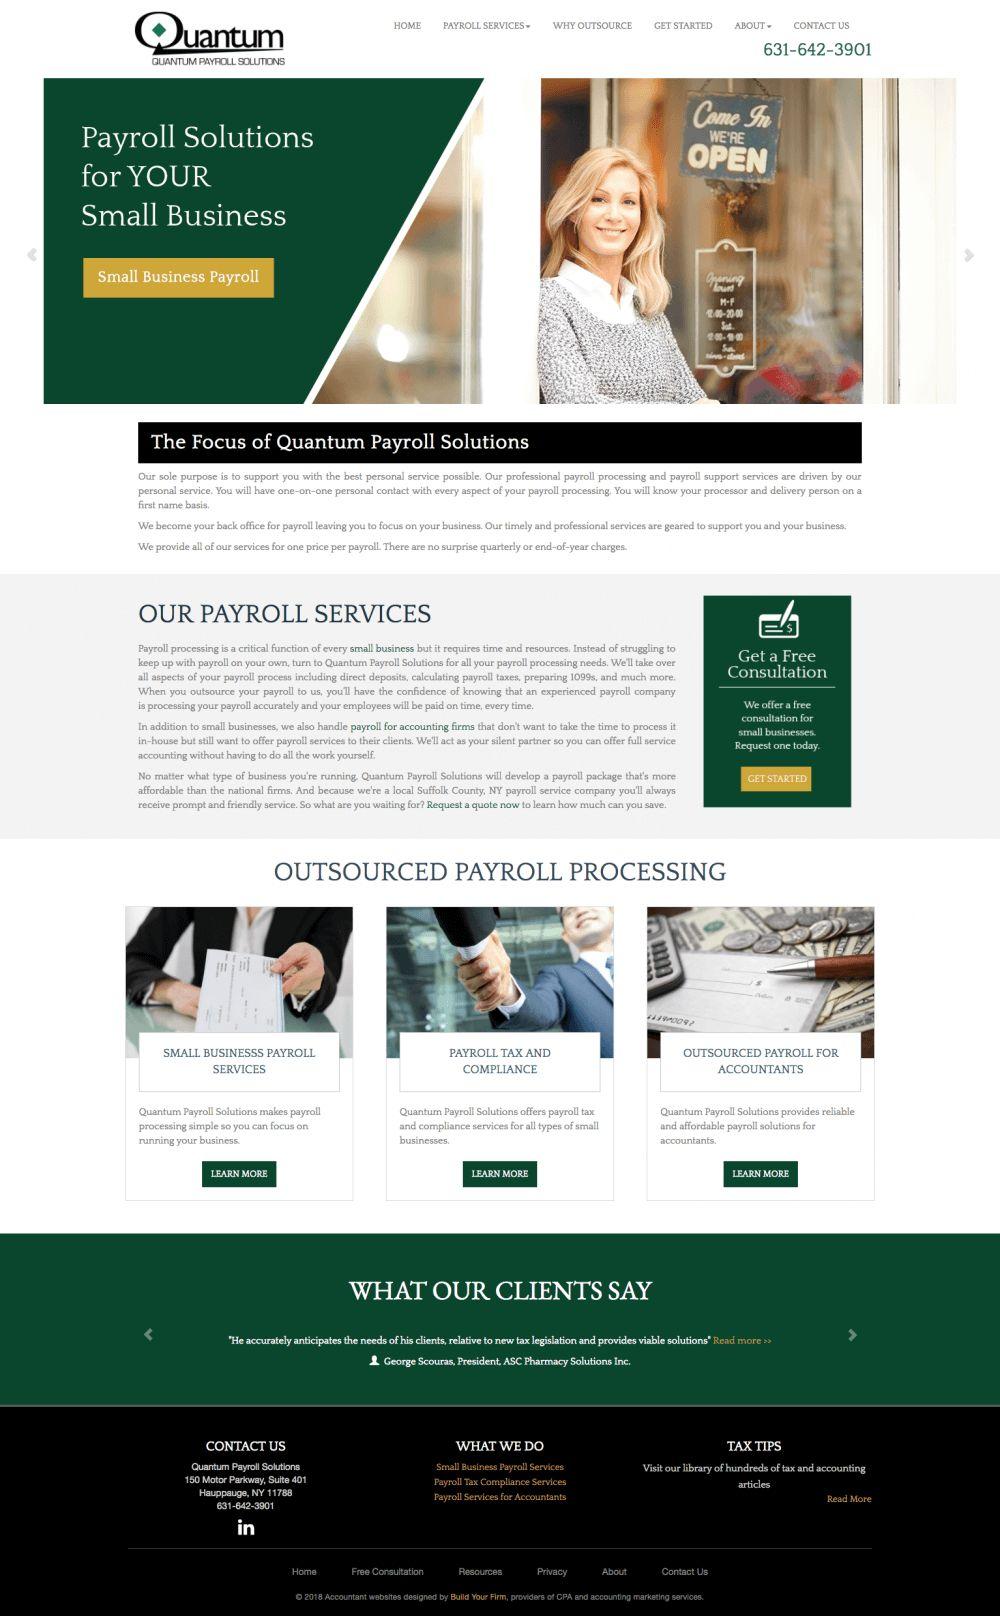 Website of Quantum Payroll Solutions